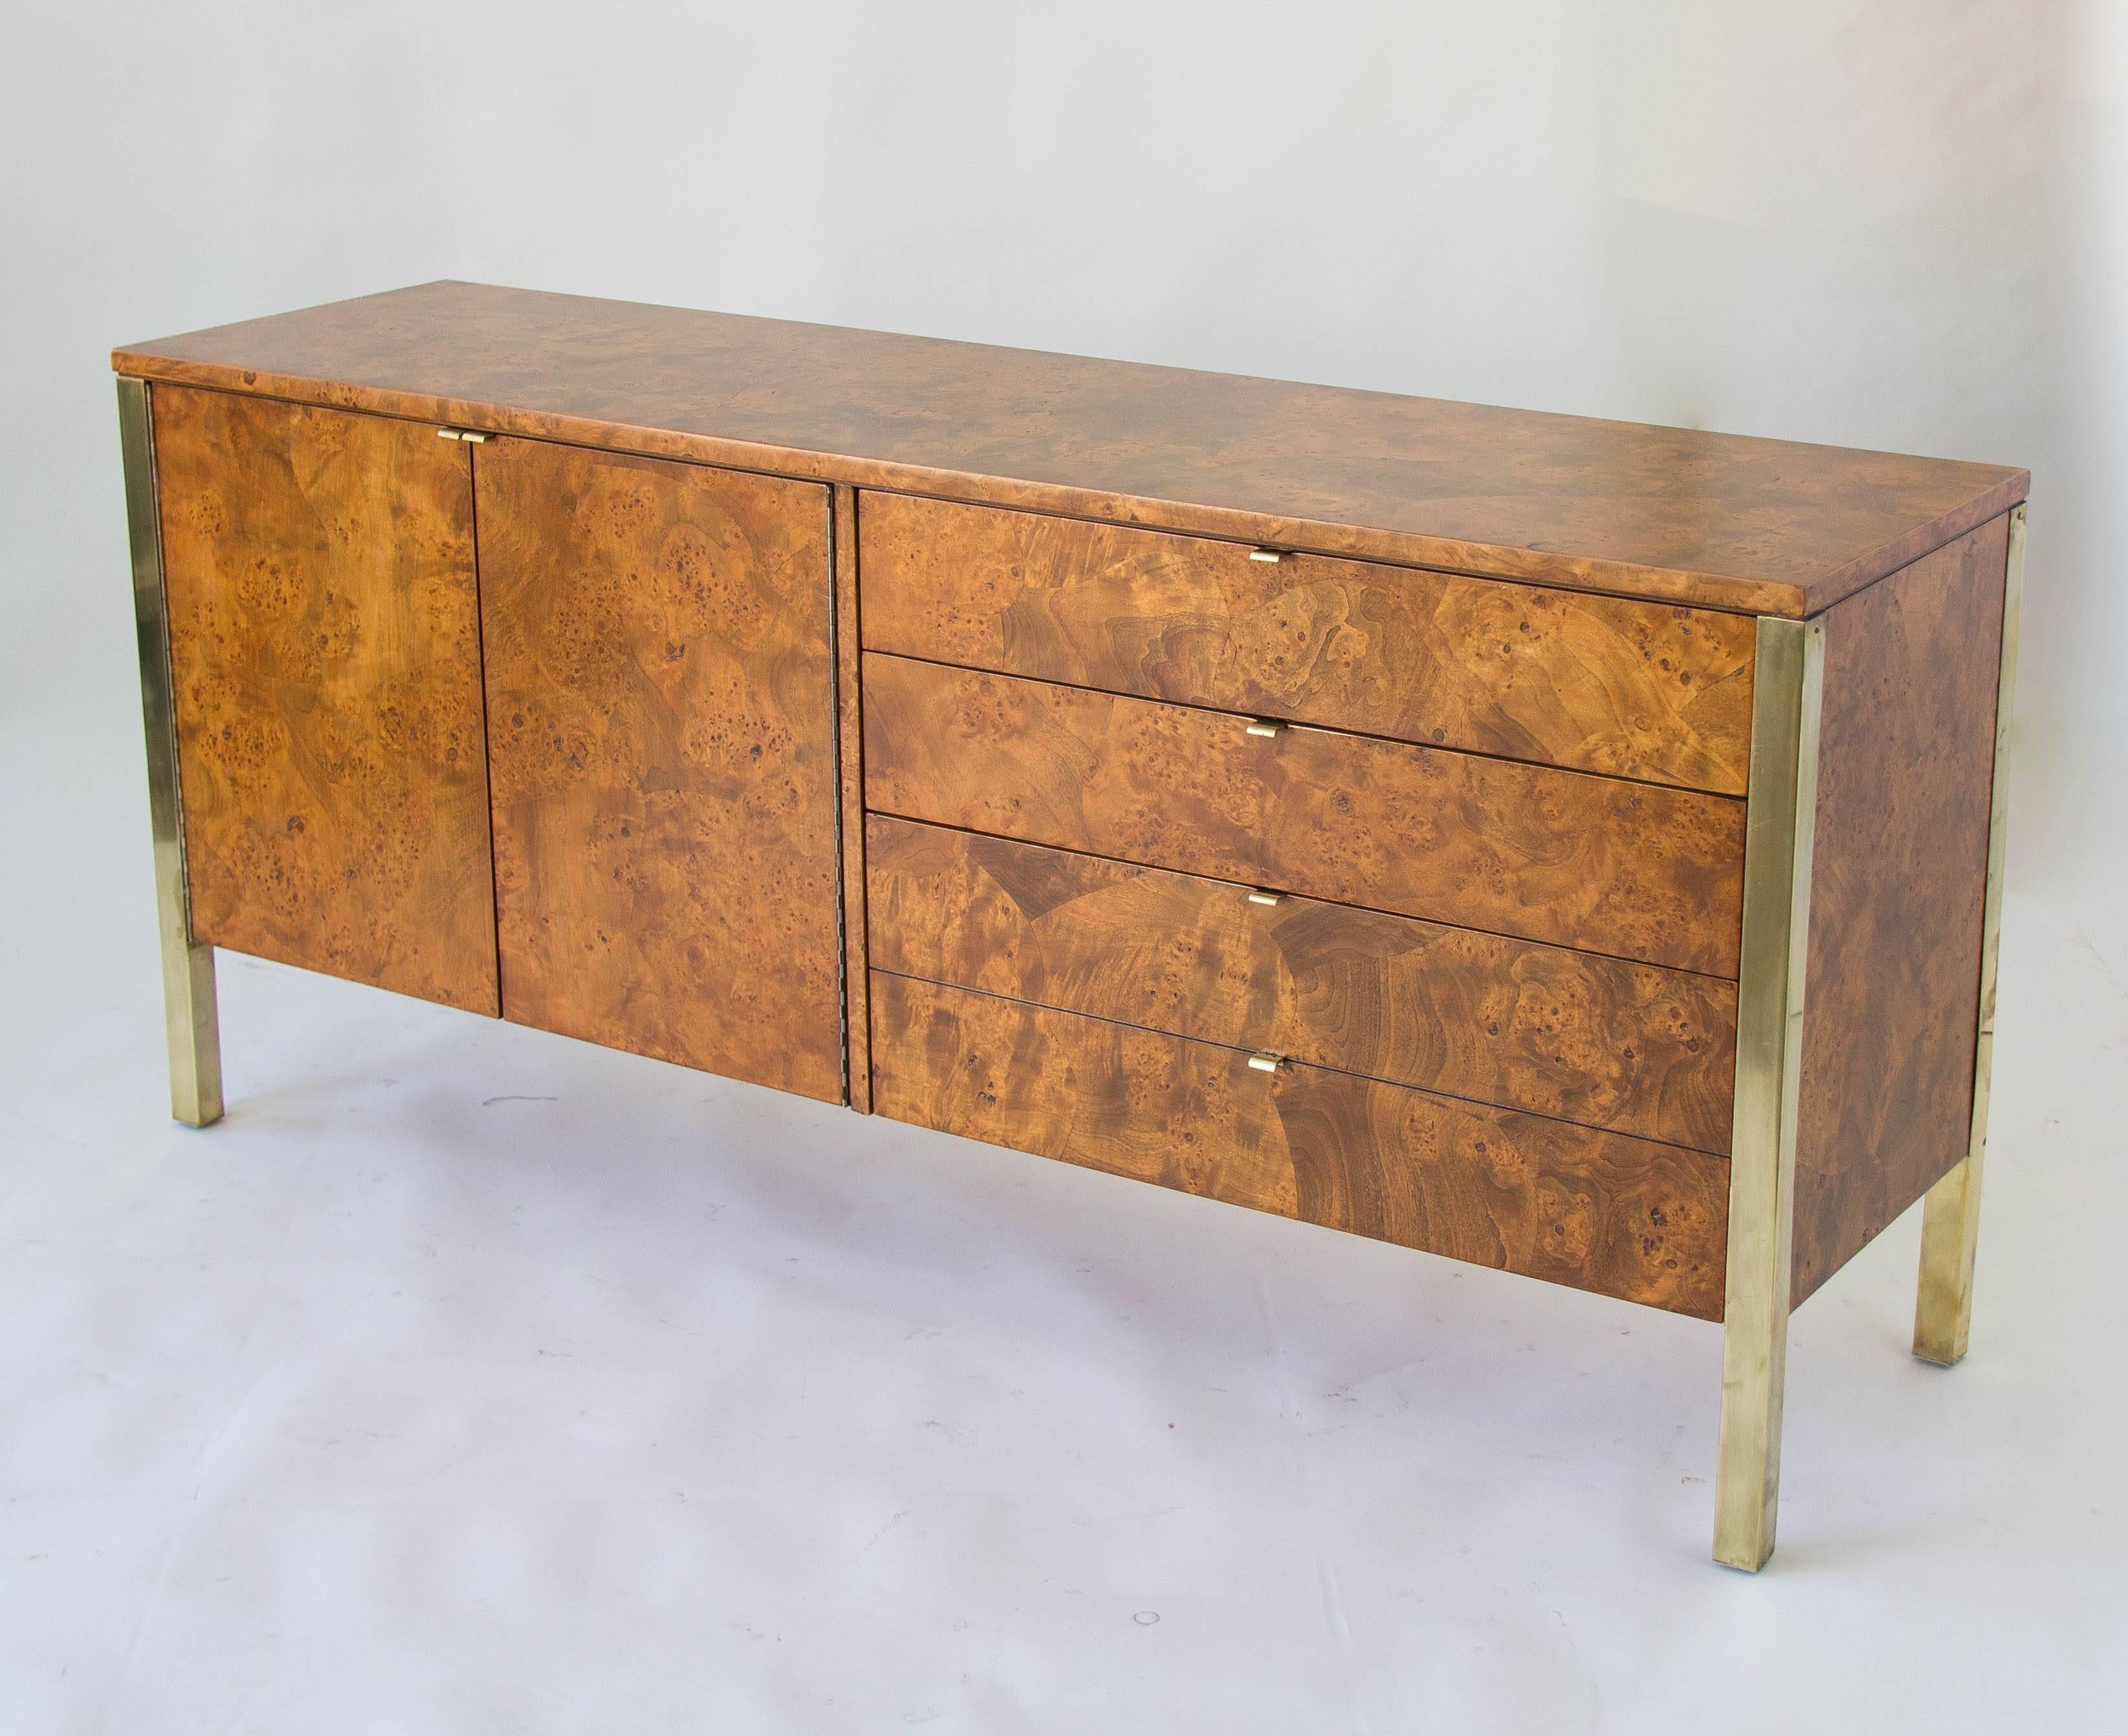 Burlwood credenza or sideboard from Tomlinson Furniture of North Carolina. The right side of the piece has four drawers with brass pulls, and the left side is a cabinet with one shelf. Each corner is encased in a brass piece that extends to form the